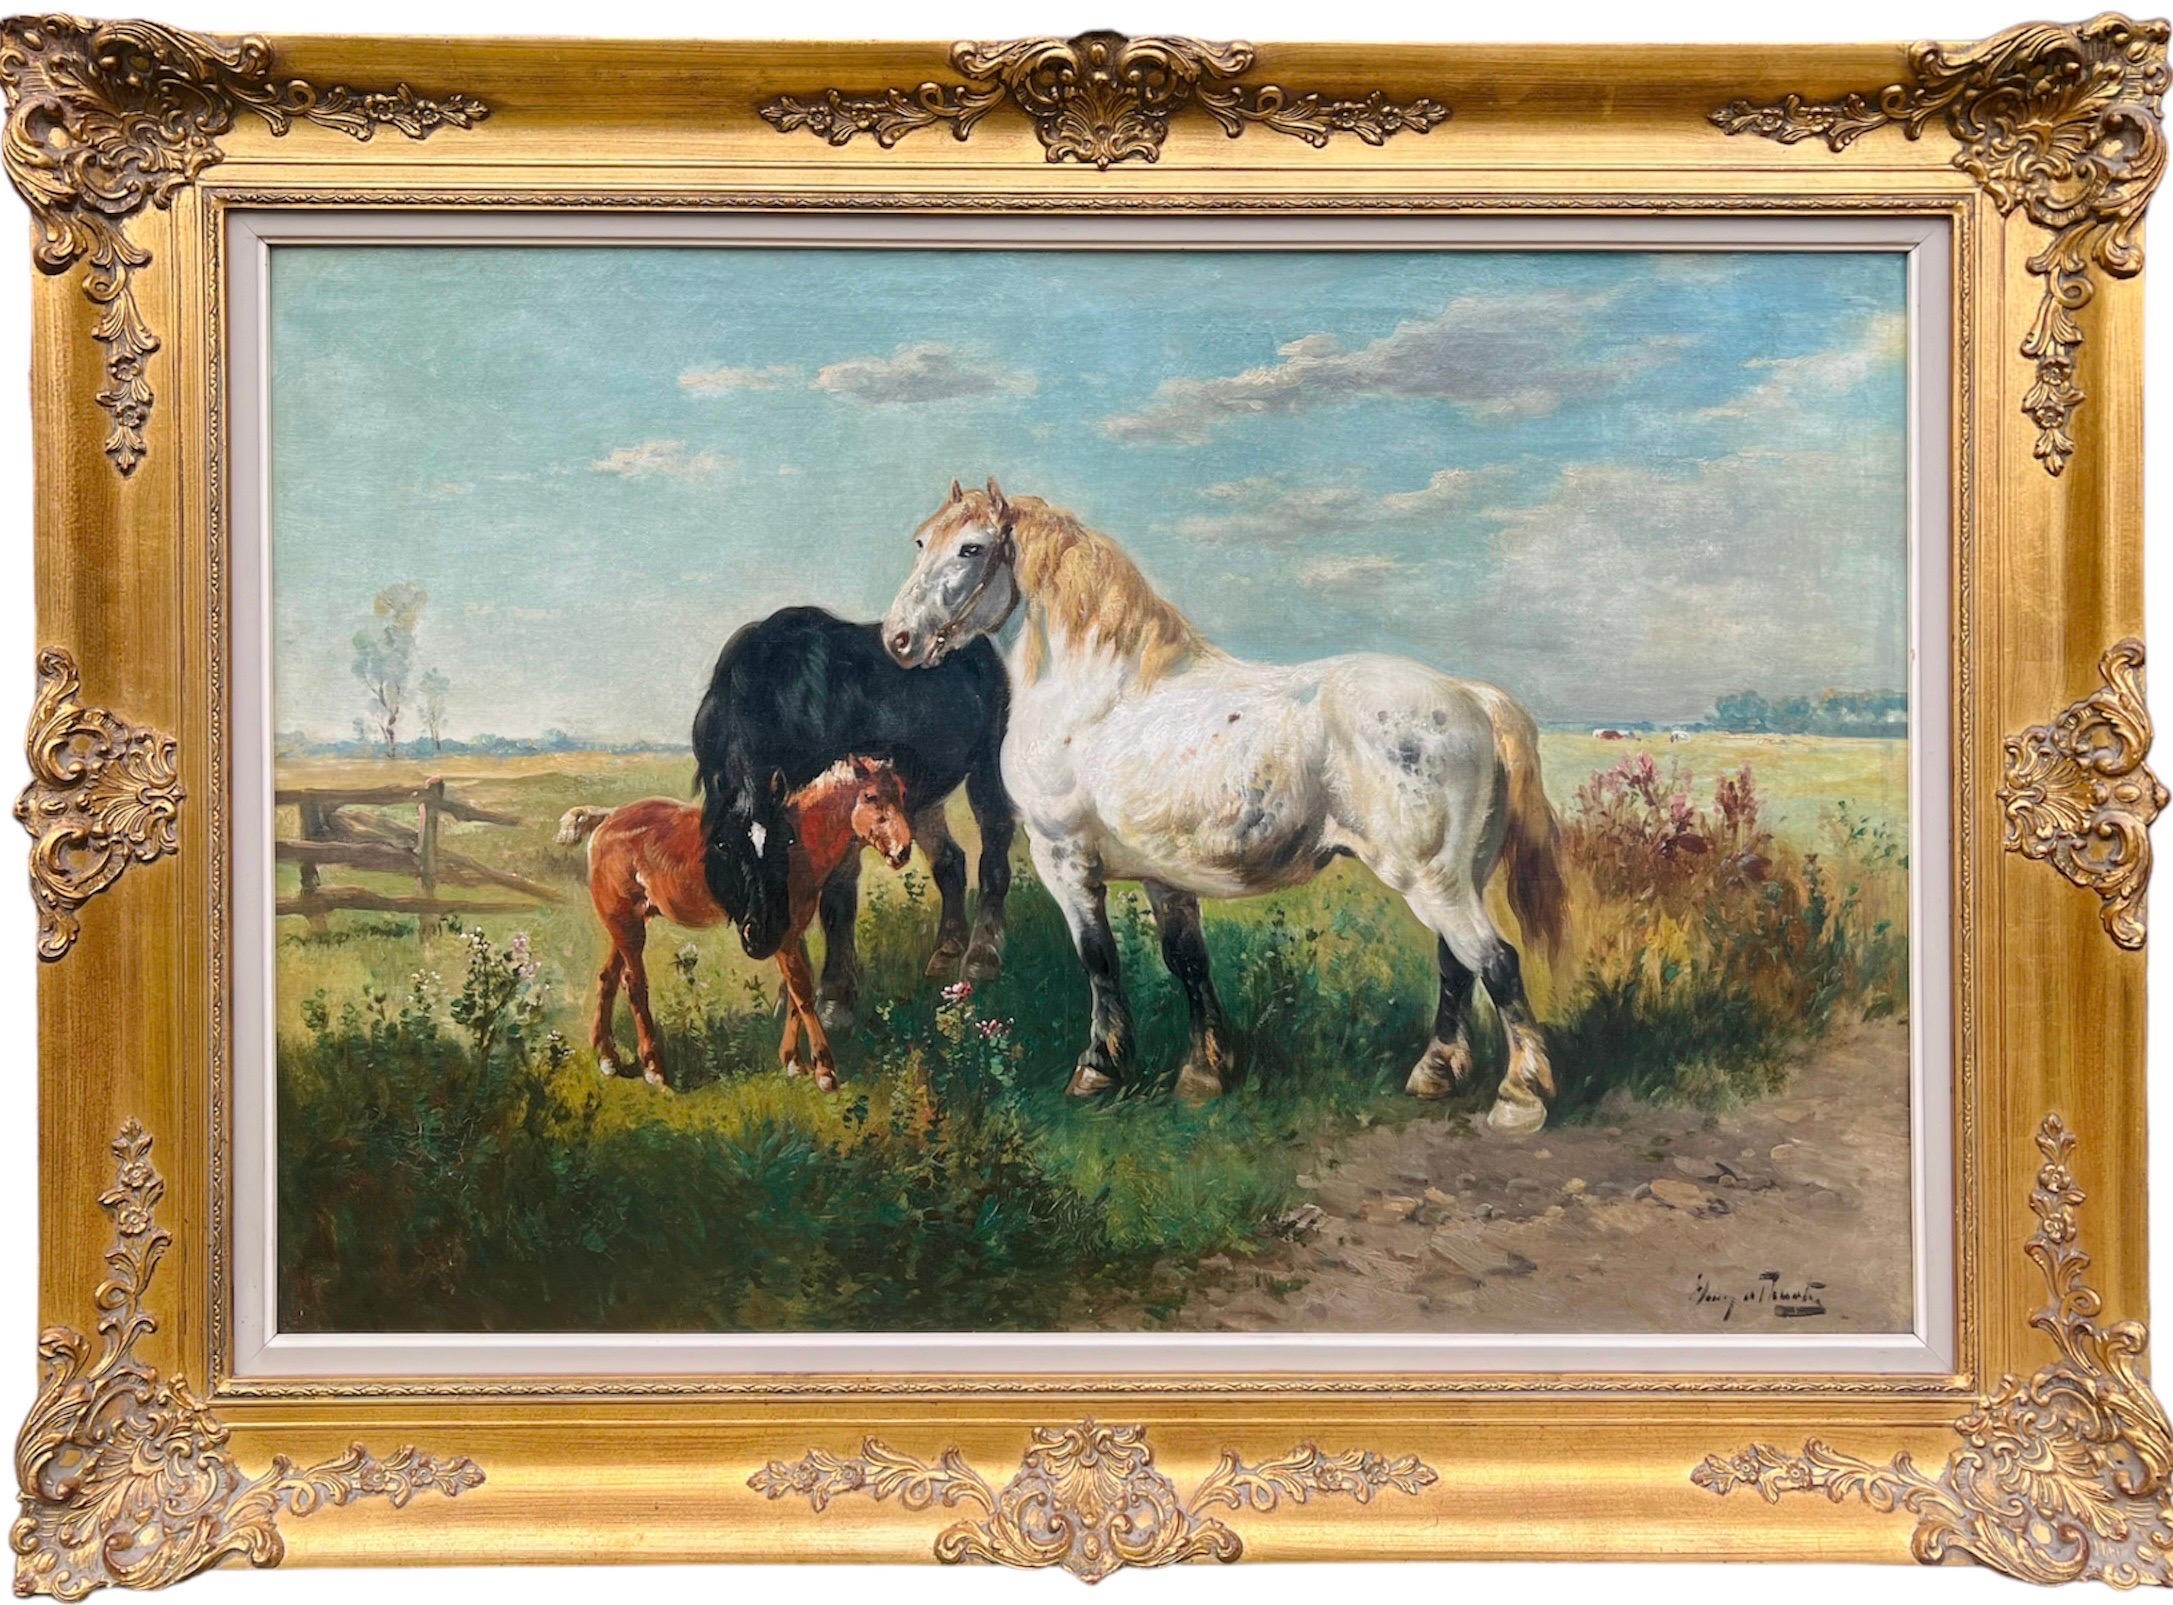 Henry Schouten Interior Painting - Large 19th century romantic oil - A loving horse family - Countryside landscape